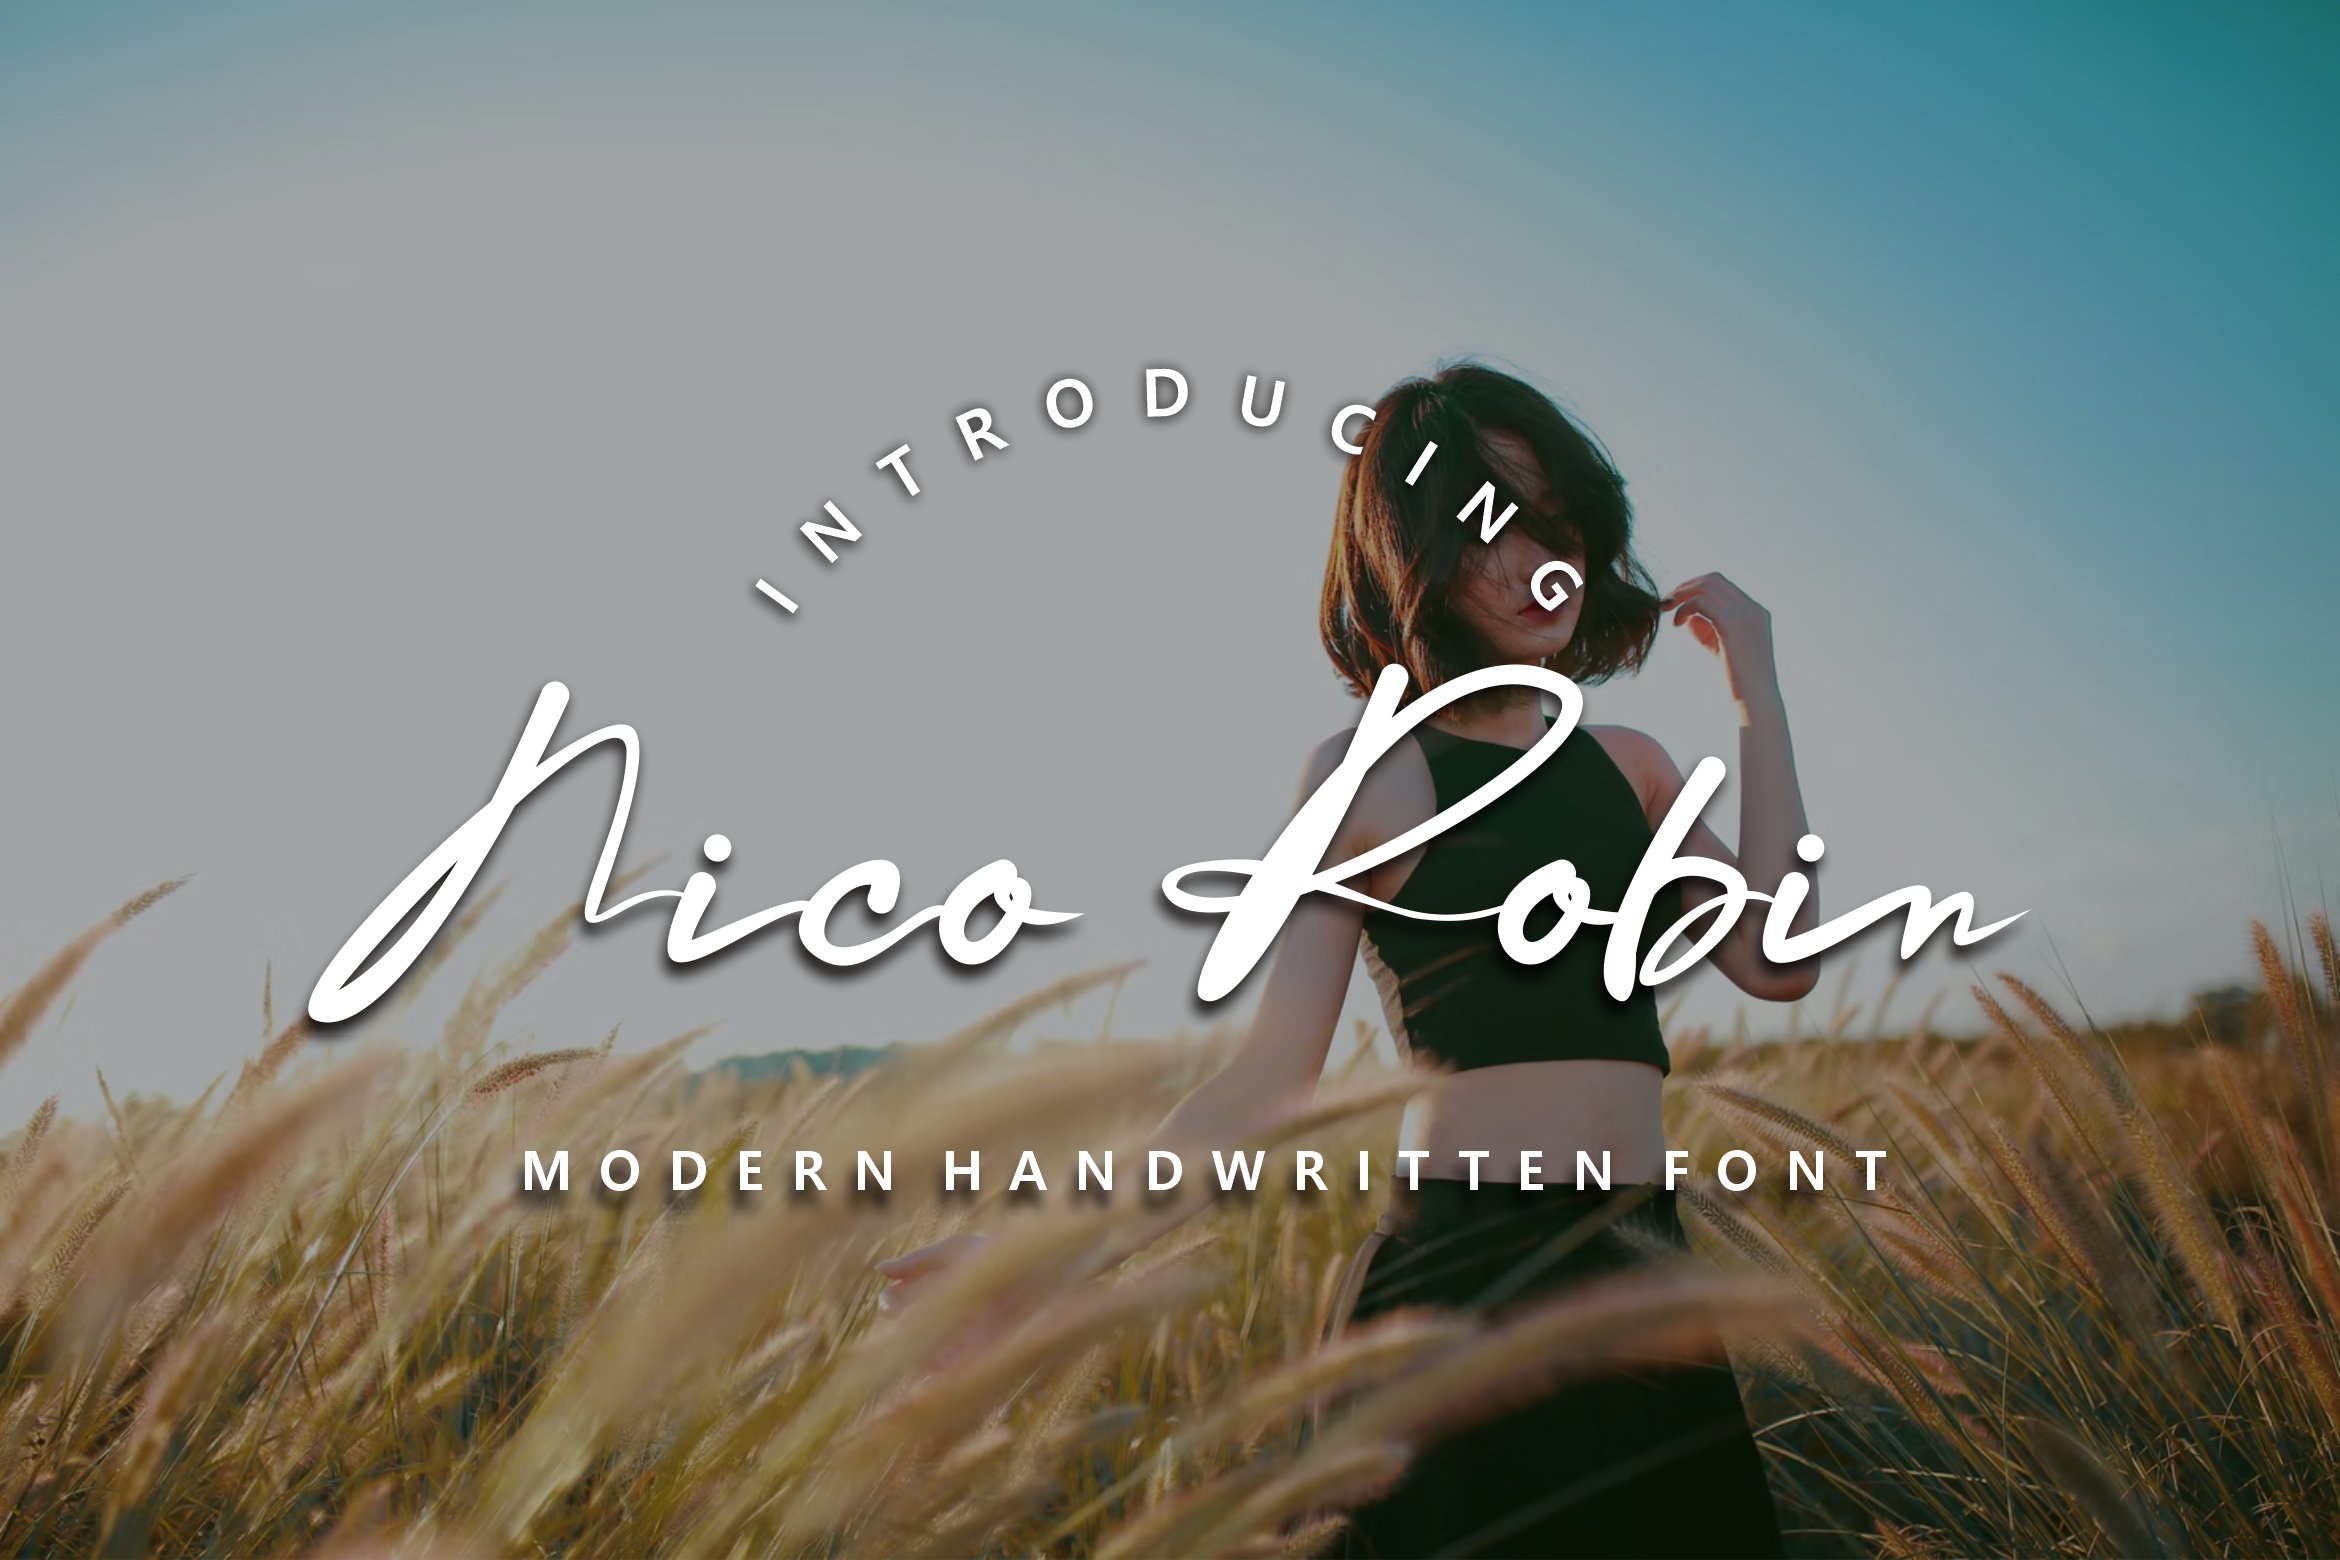 Nico robin hand written font cover image.